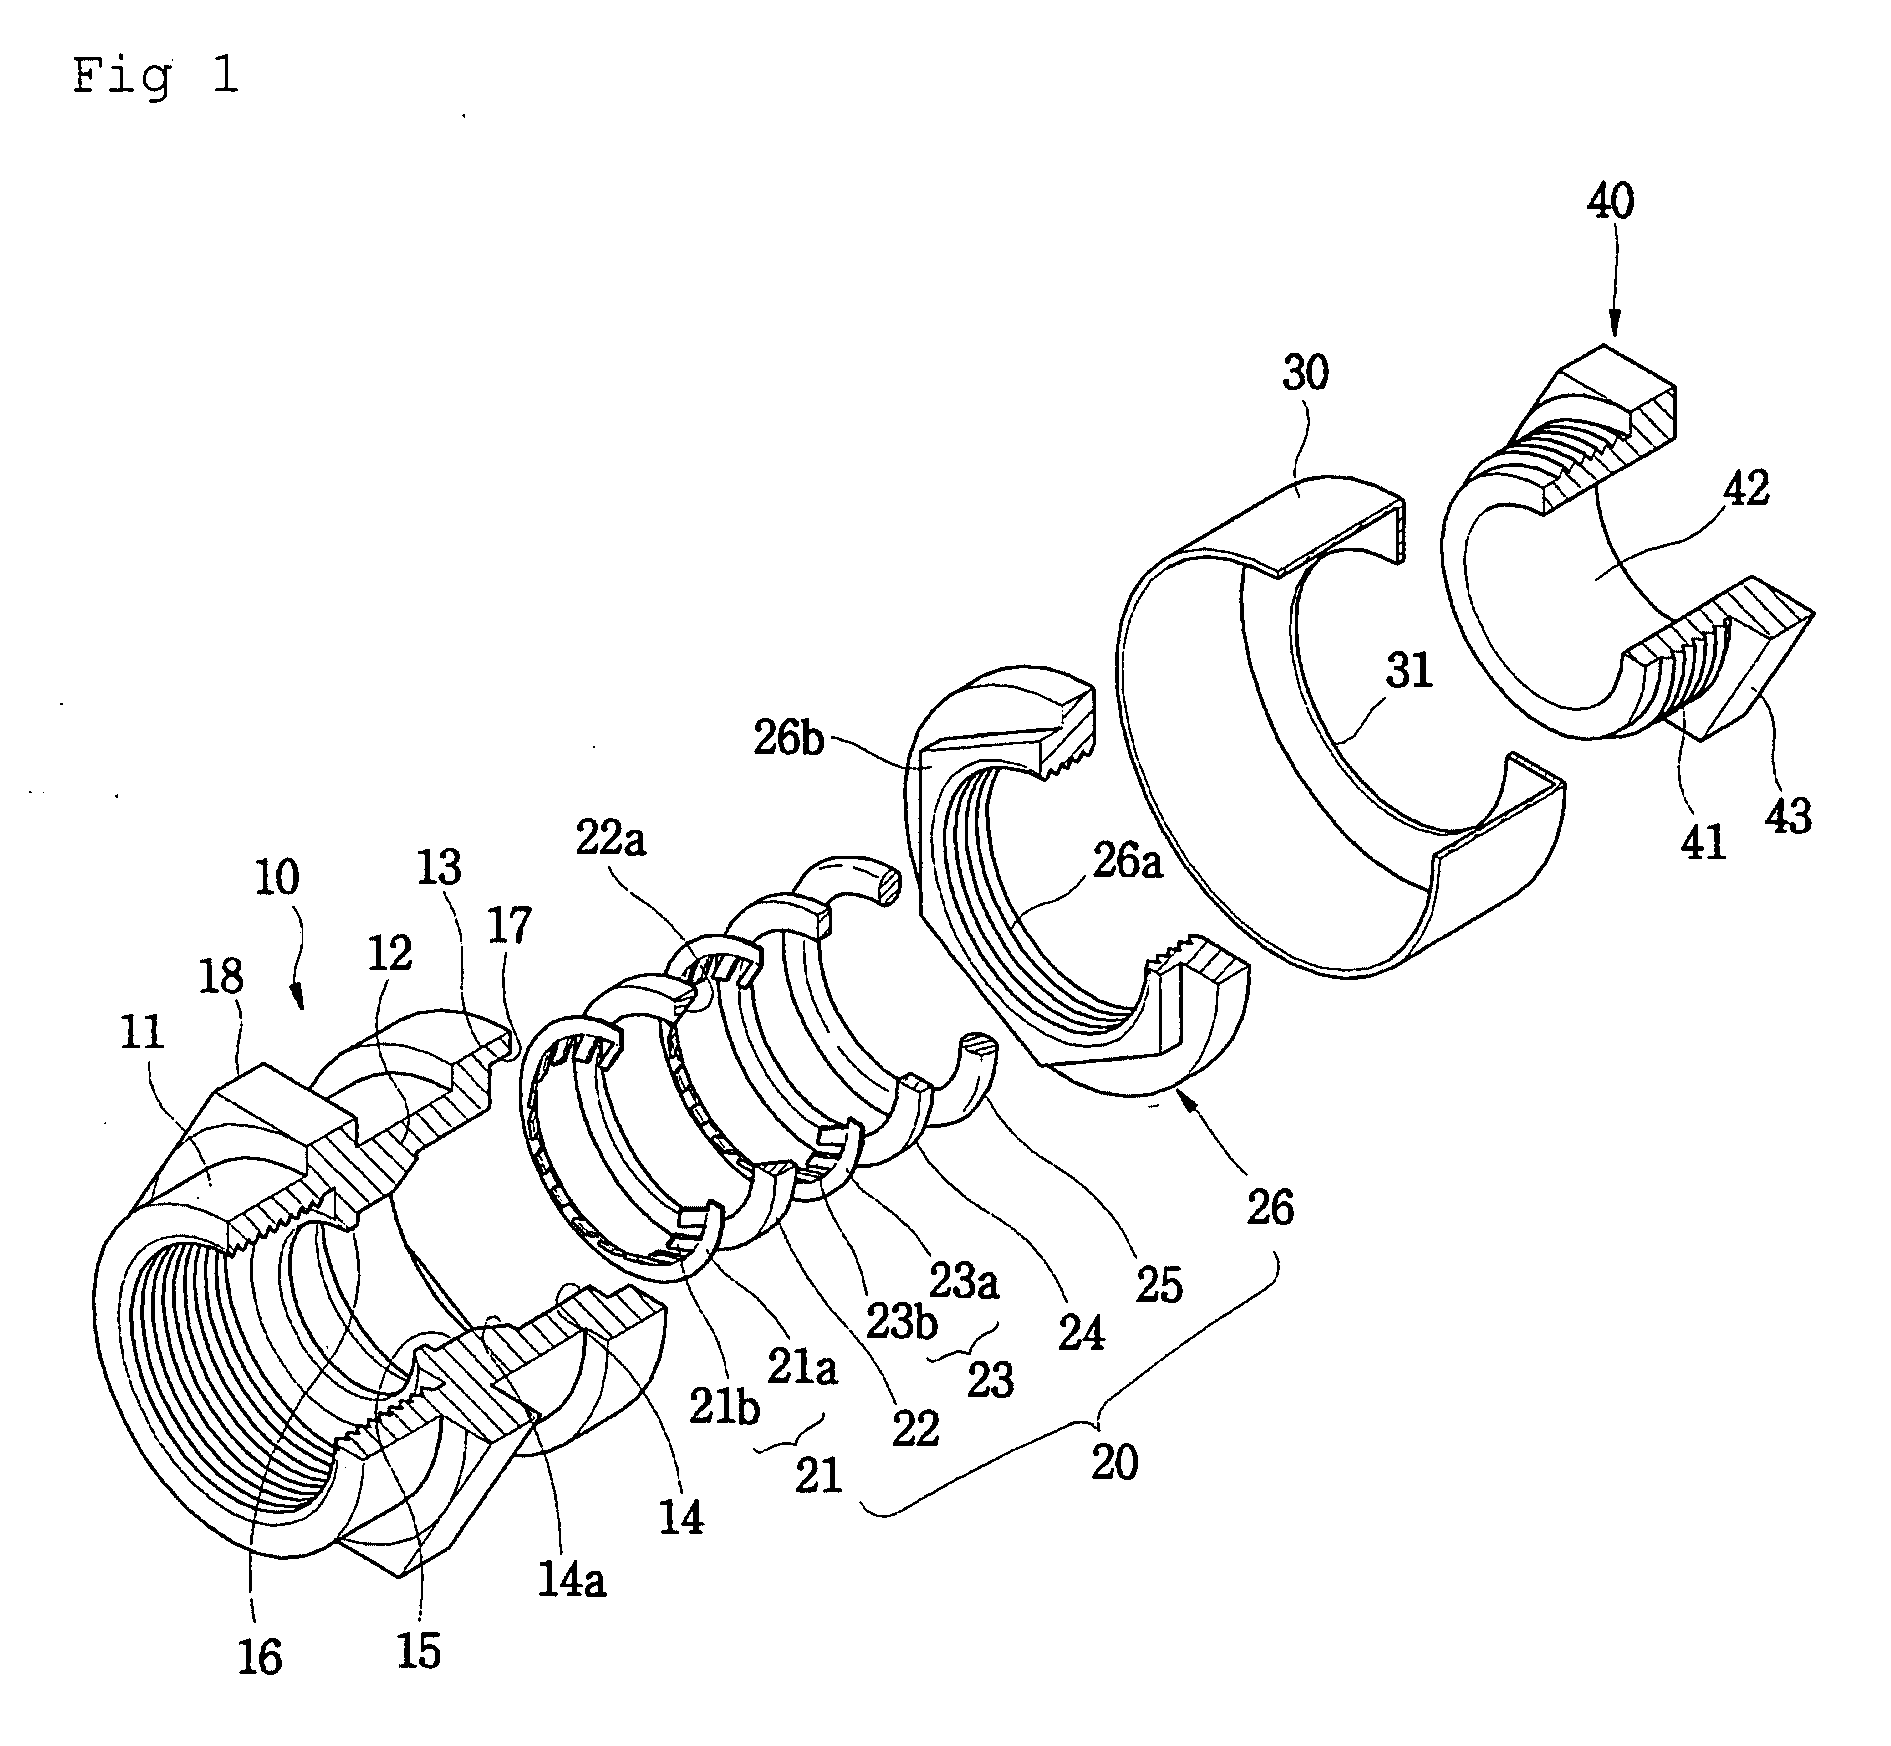 Coupling device for circular pipes